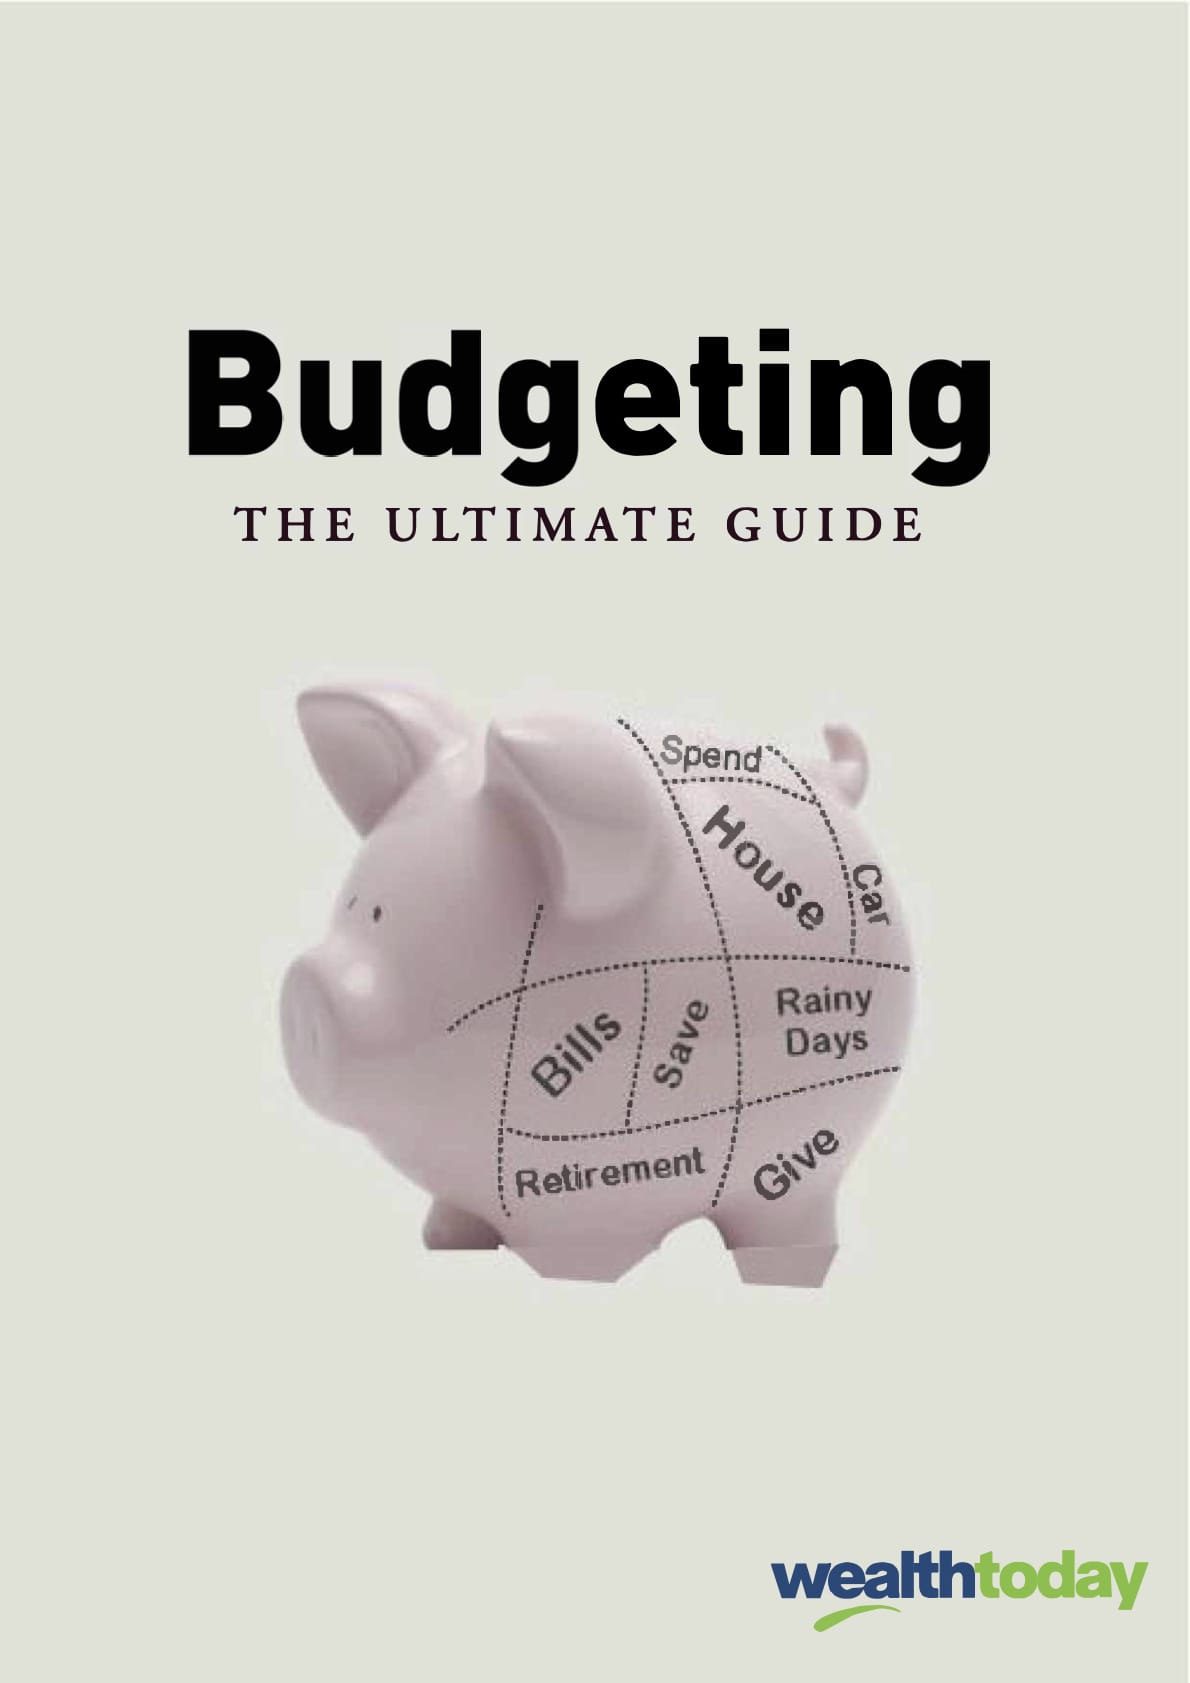 Budgeting-The-Ultimate-Guide-WT-form-201810